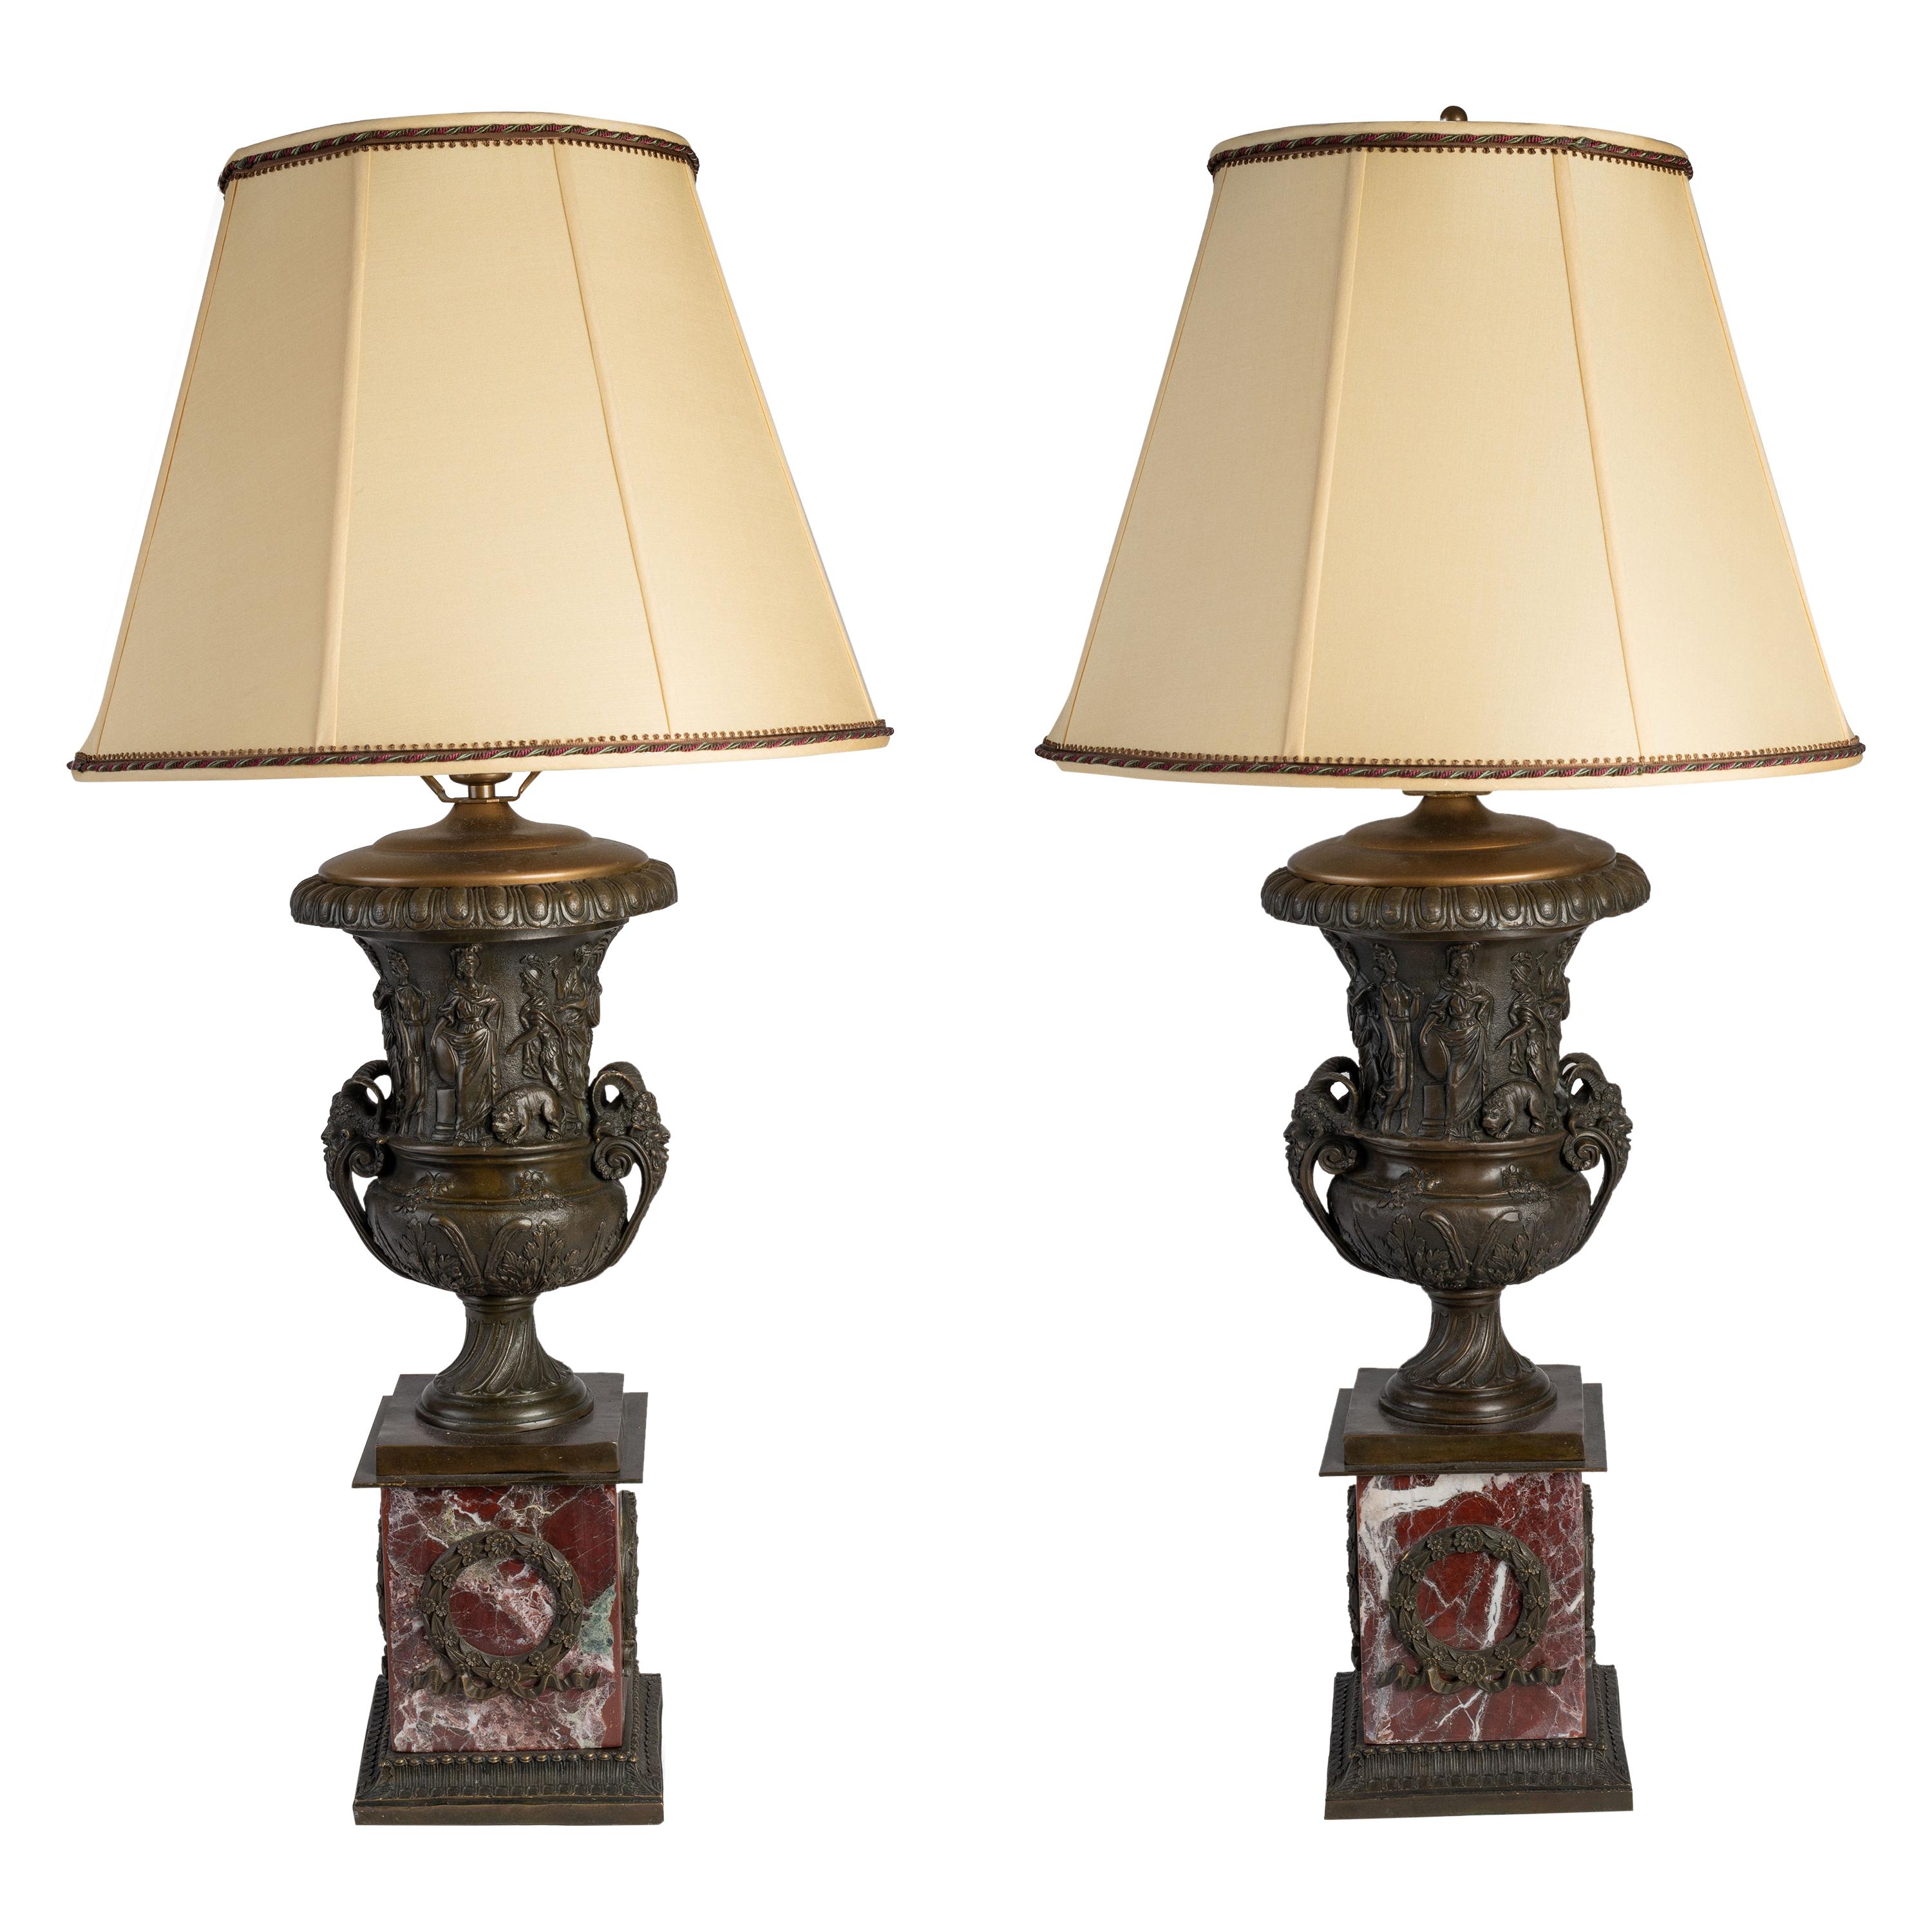 Pair of Neoclassical Patinated Bronze and Red Marble Urns Mounted as Lamps For Sale